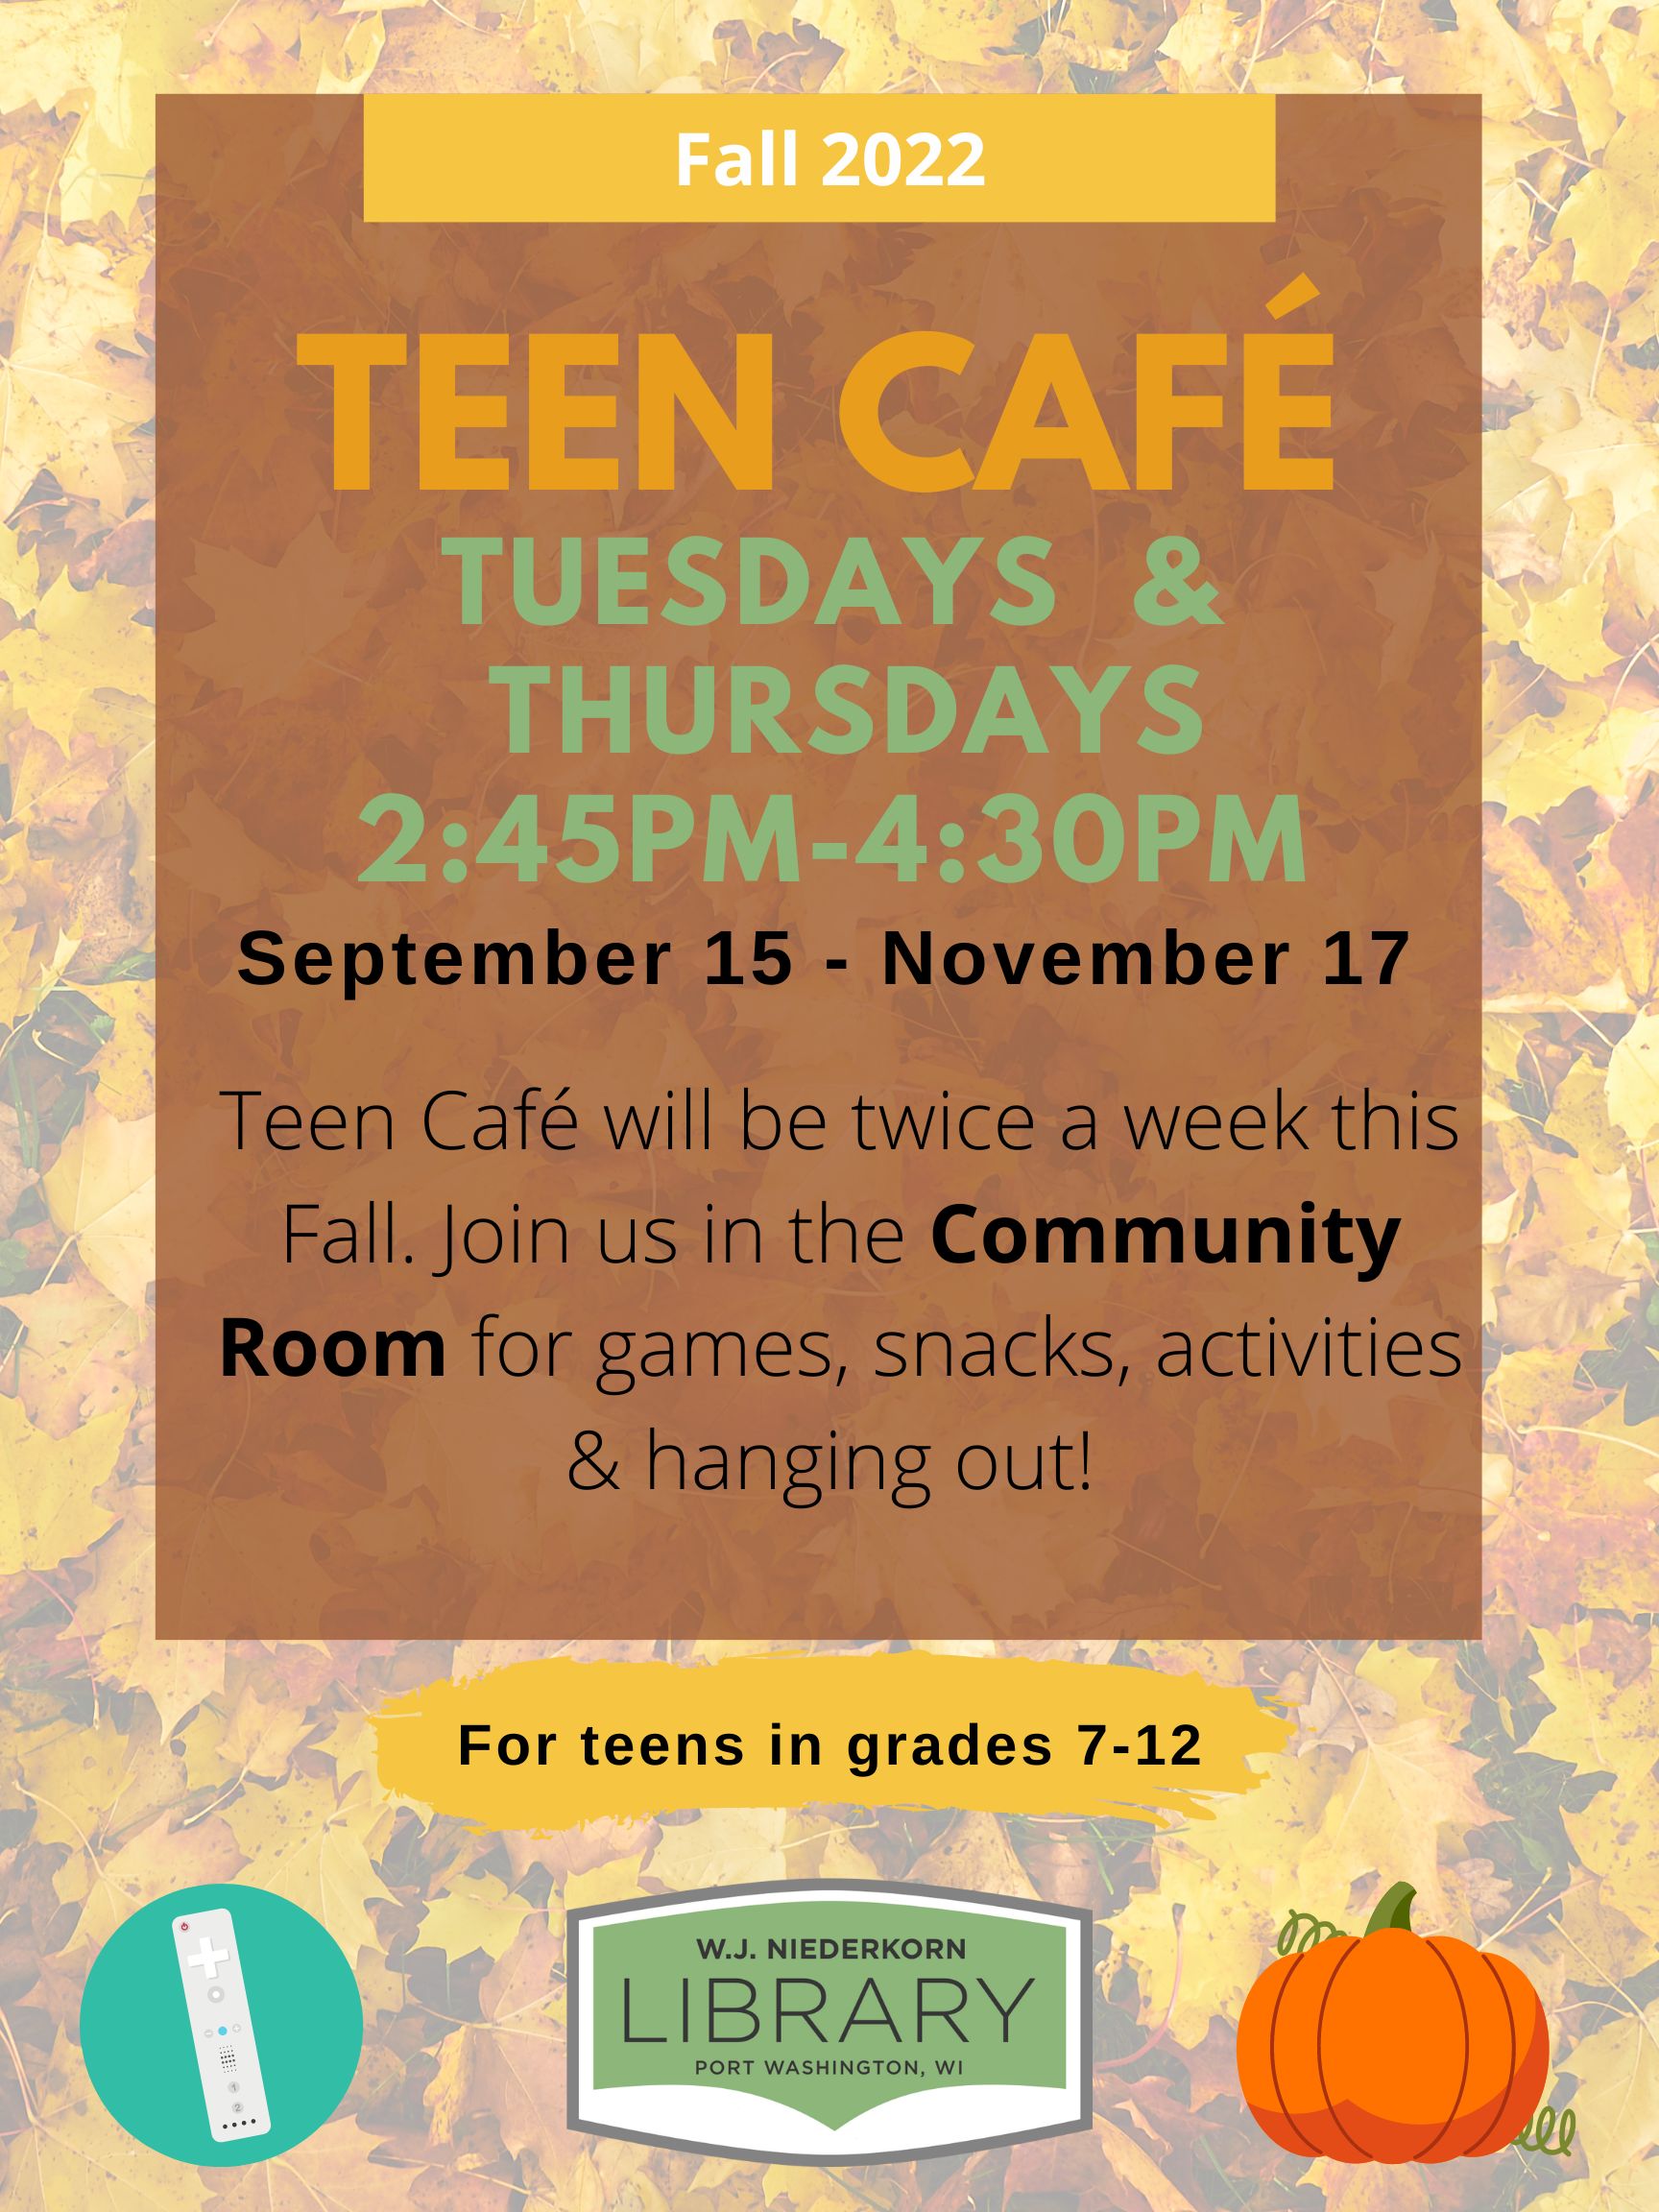 Fall 2022 Teen Cafe flyer_meets Tuesdays and Thursdays from Sept 15 to Nov 17